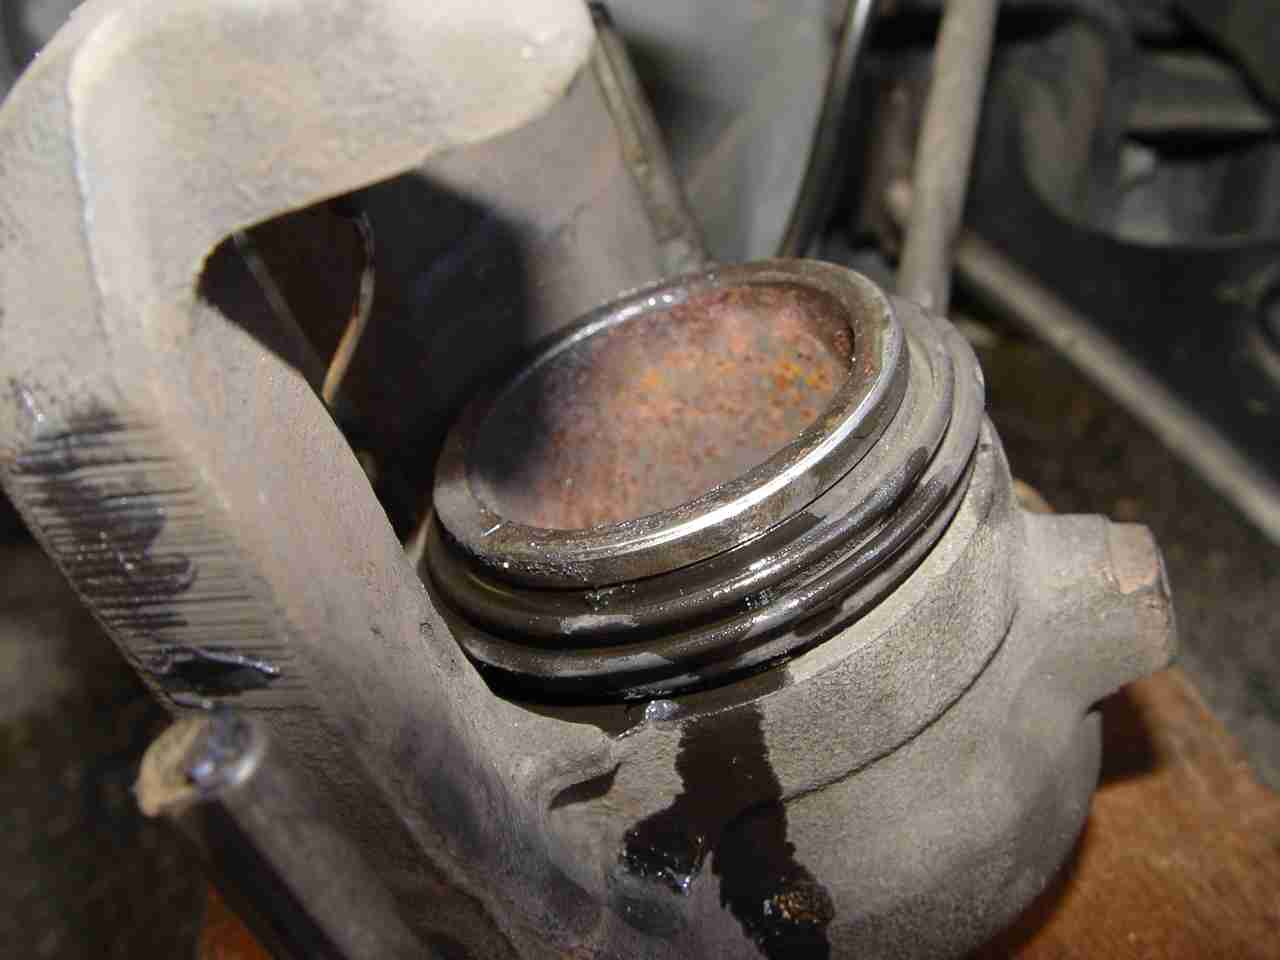 signs%20of%20a%20leak%20from%20piston%20